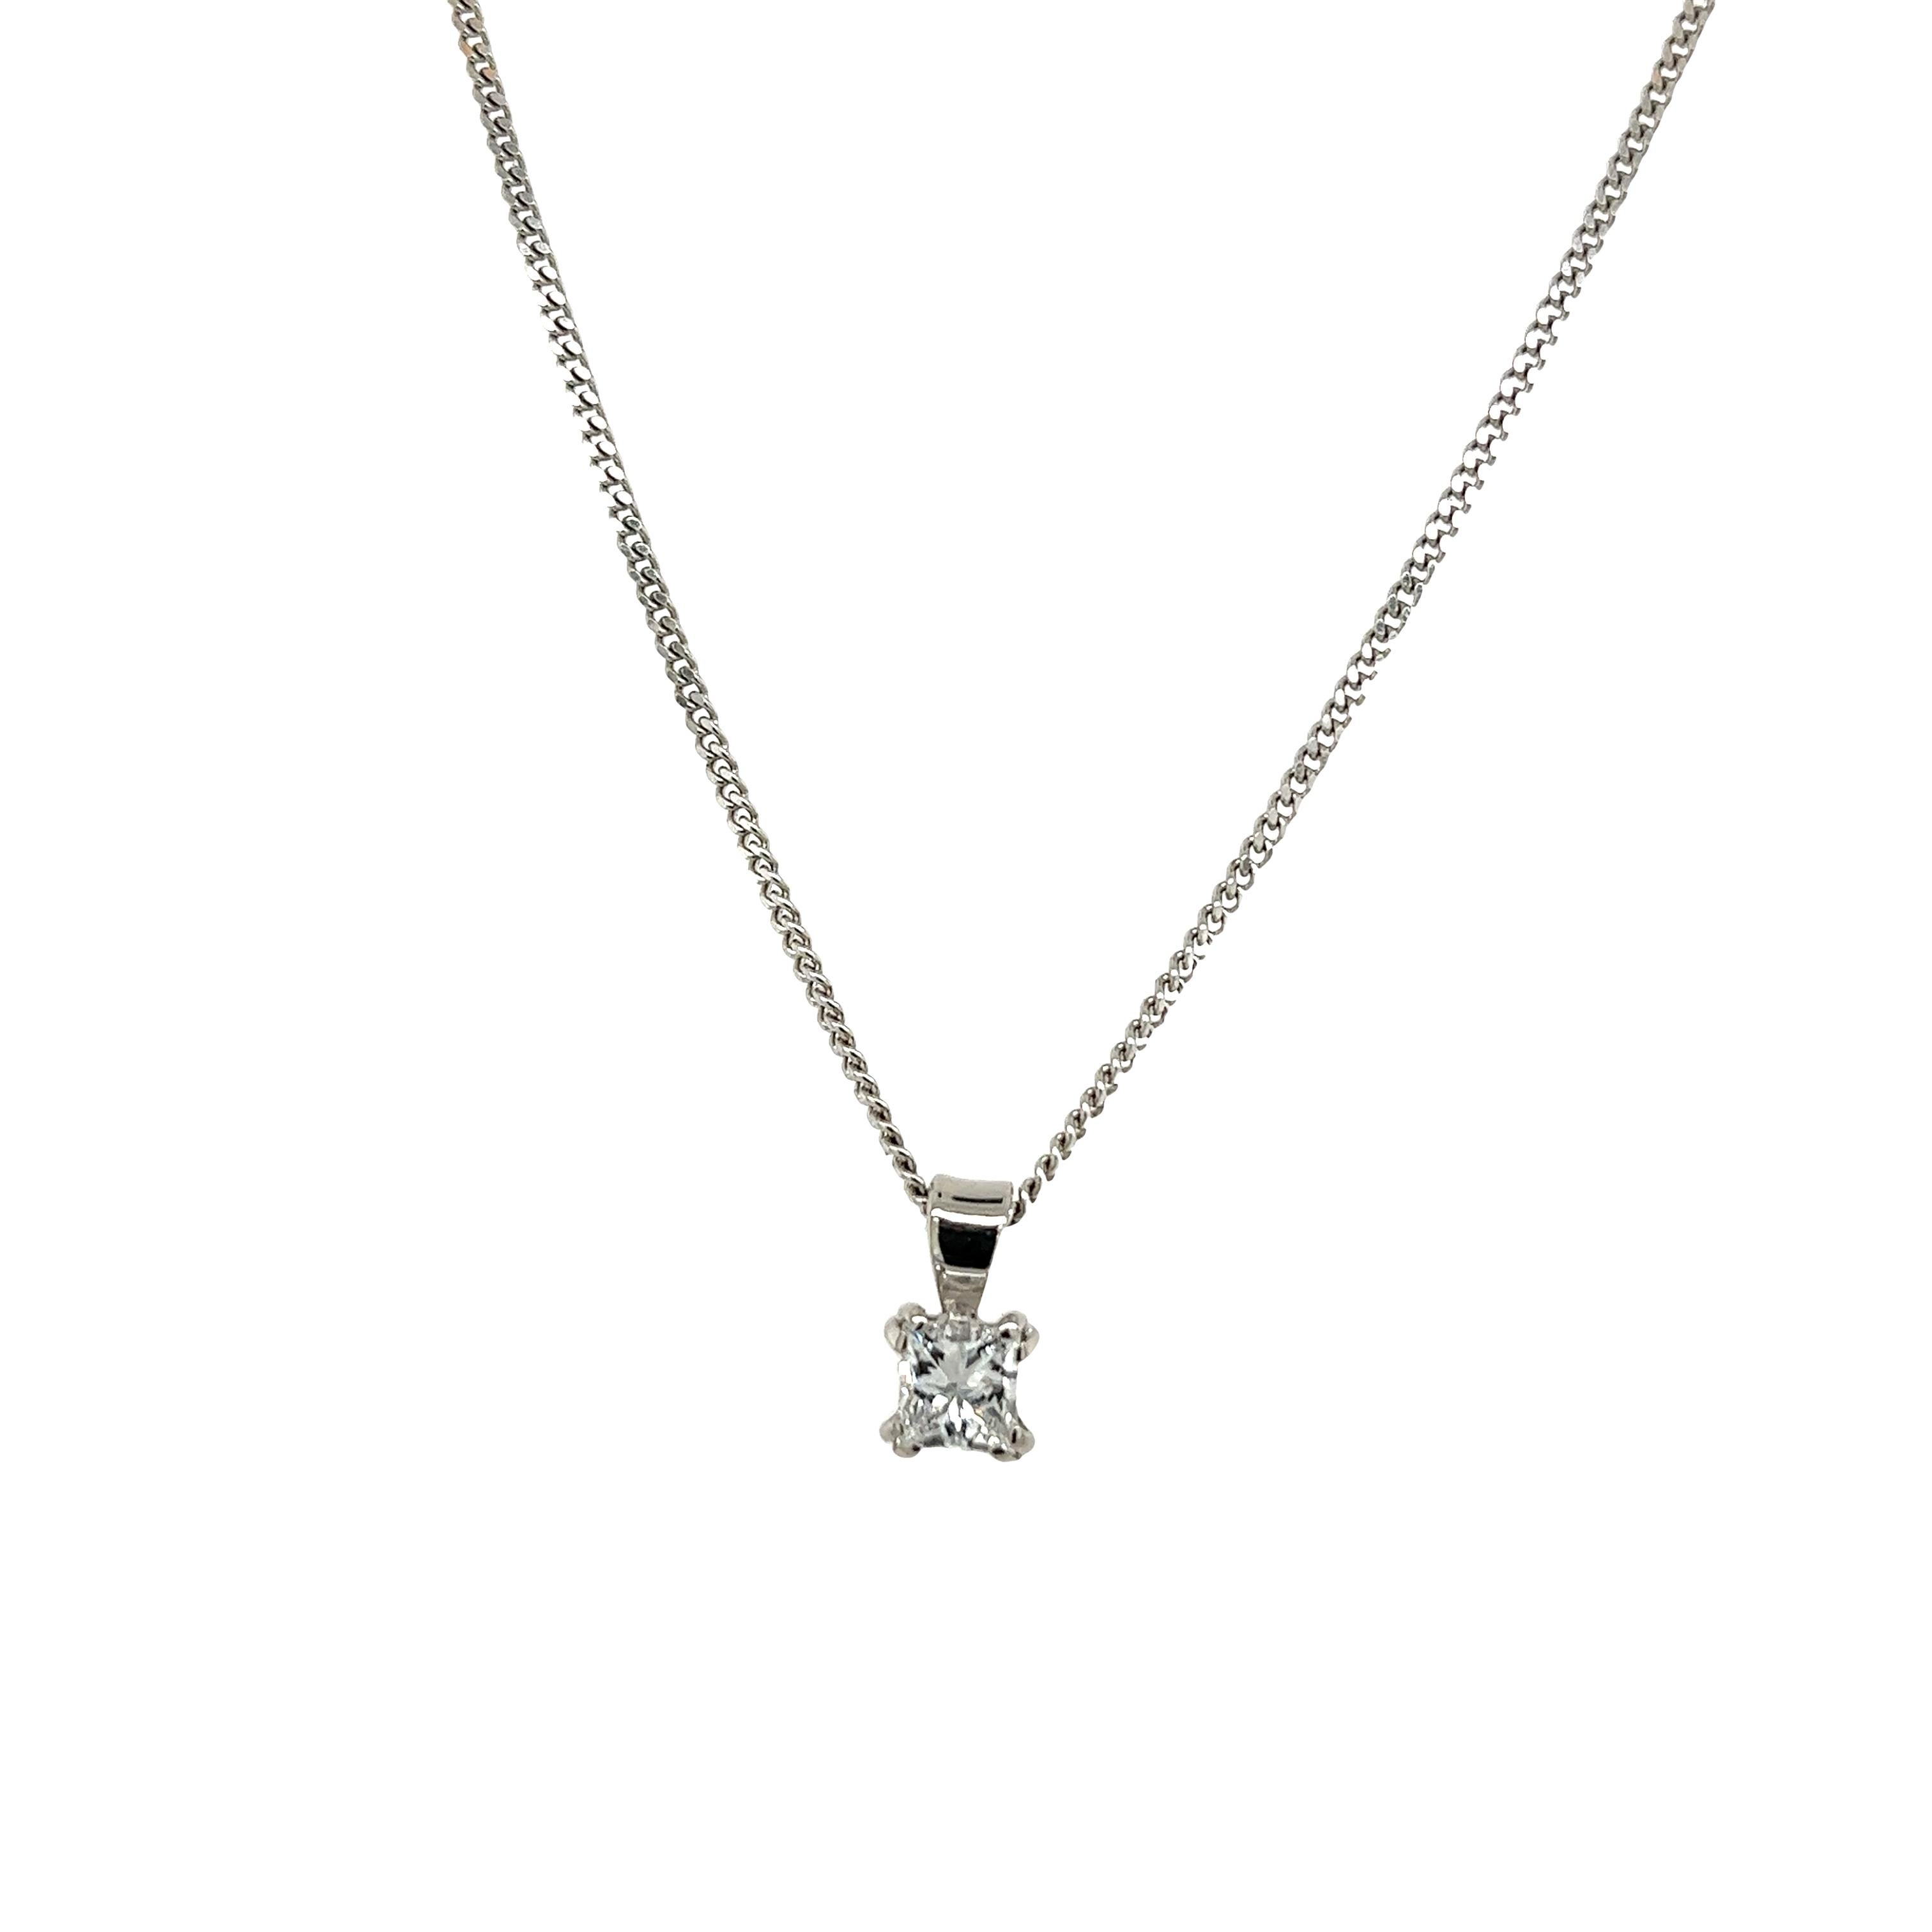 The perfect gift for the one you love, 
the 18ct white gold diamond pendant  
with a 0.49ct princess cut diamond. 
The pendant sits on a 18-inch 18ct white gold chain 
and can be worn with any outfit.
Total Diamond Weight: 0.49ct
Diamond Colour: